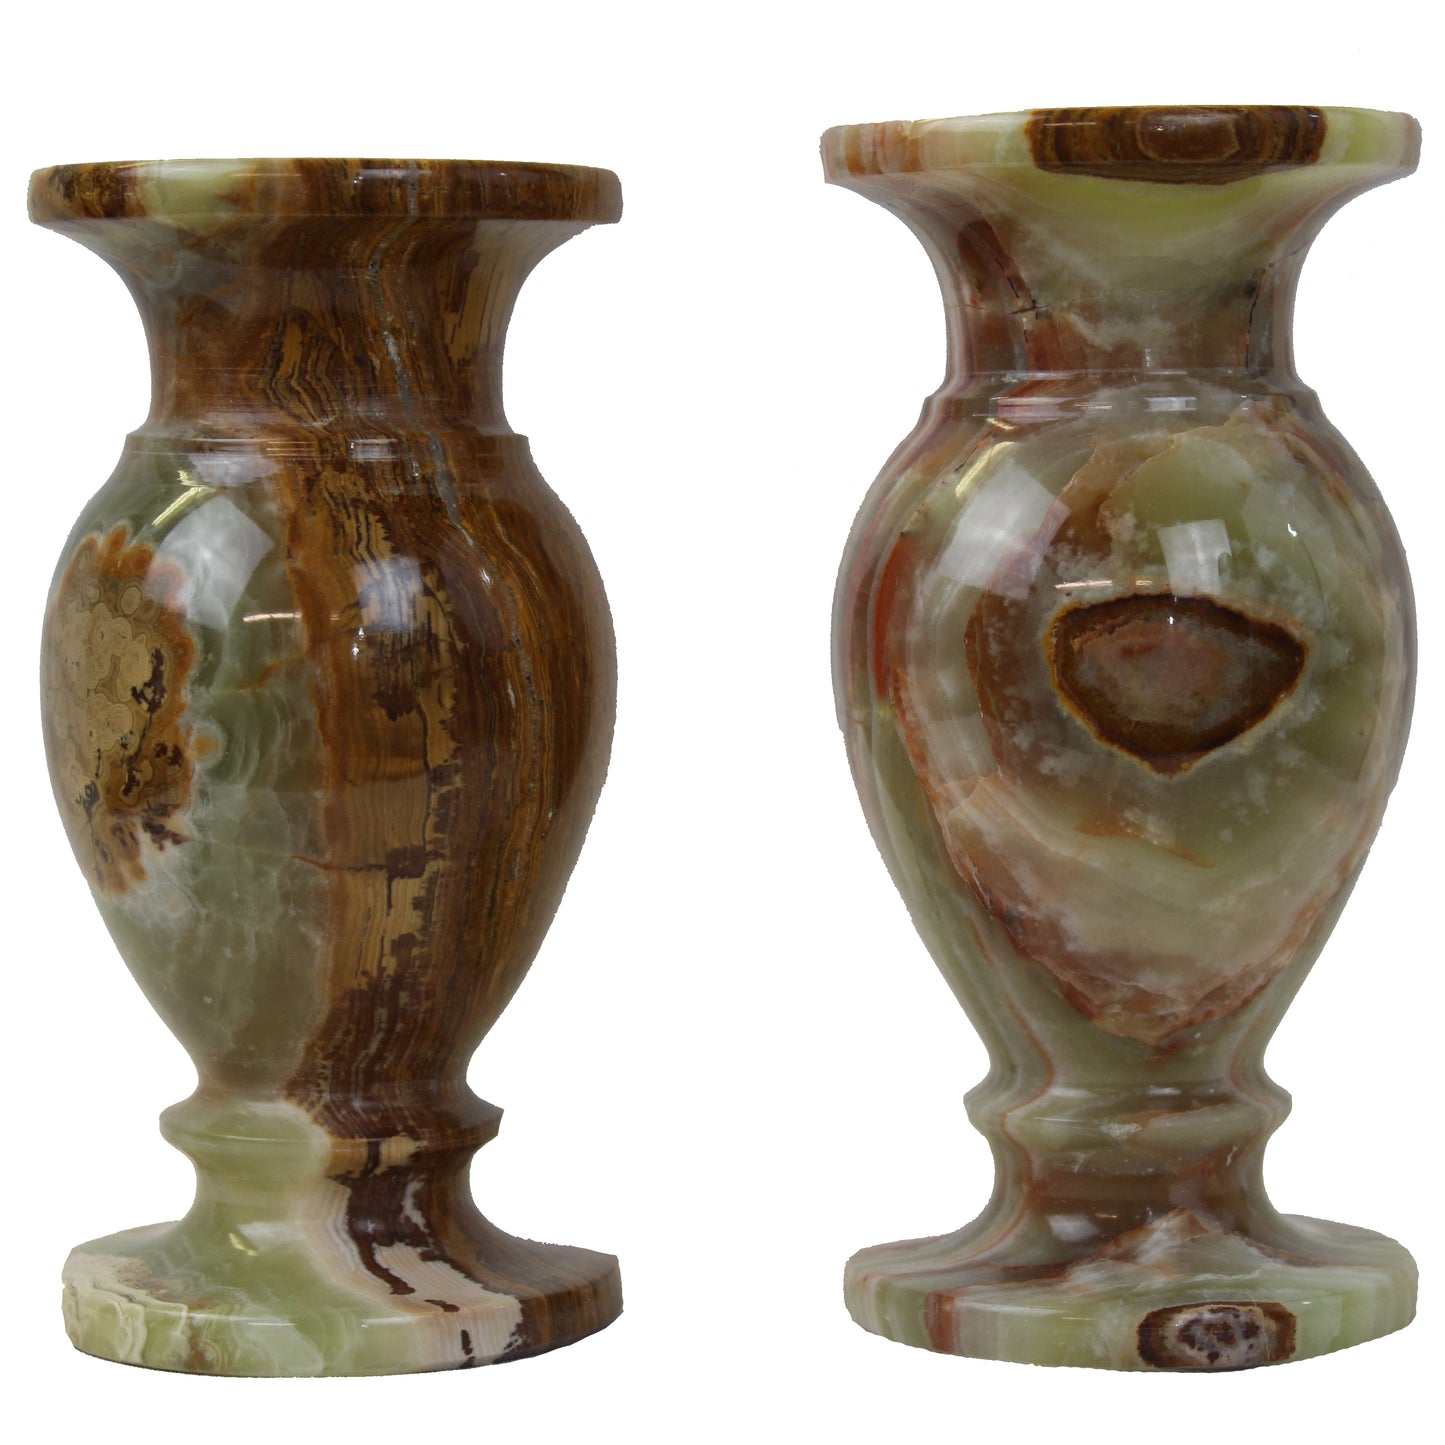 Natural Geo Multicolored Decorative Handcrafted 6" Onyx Vase (Set of 2)